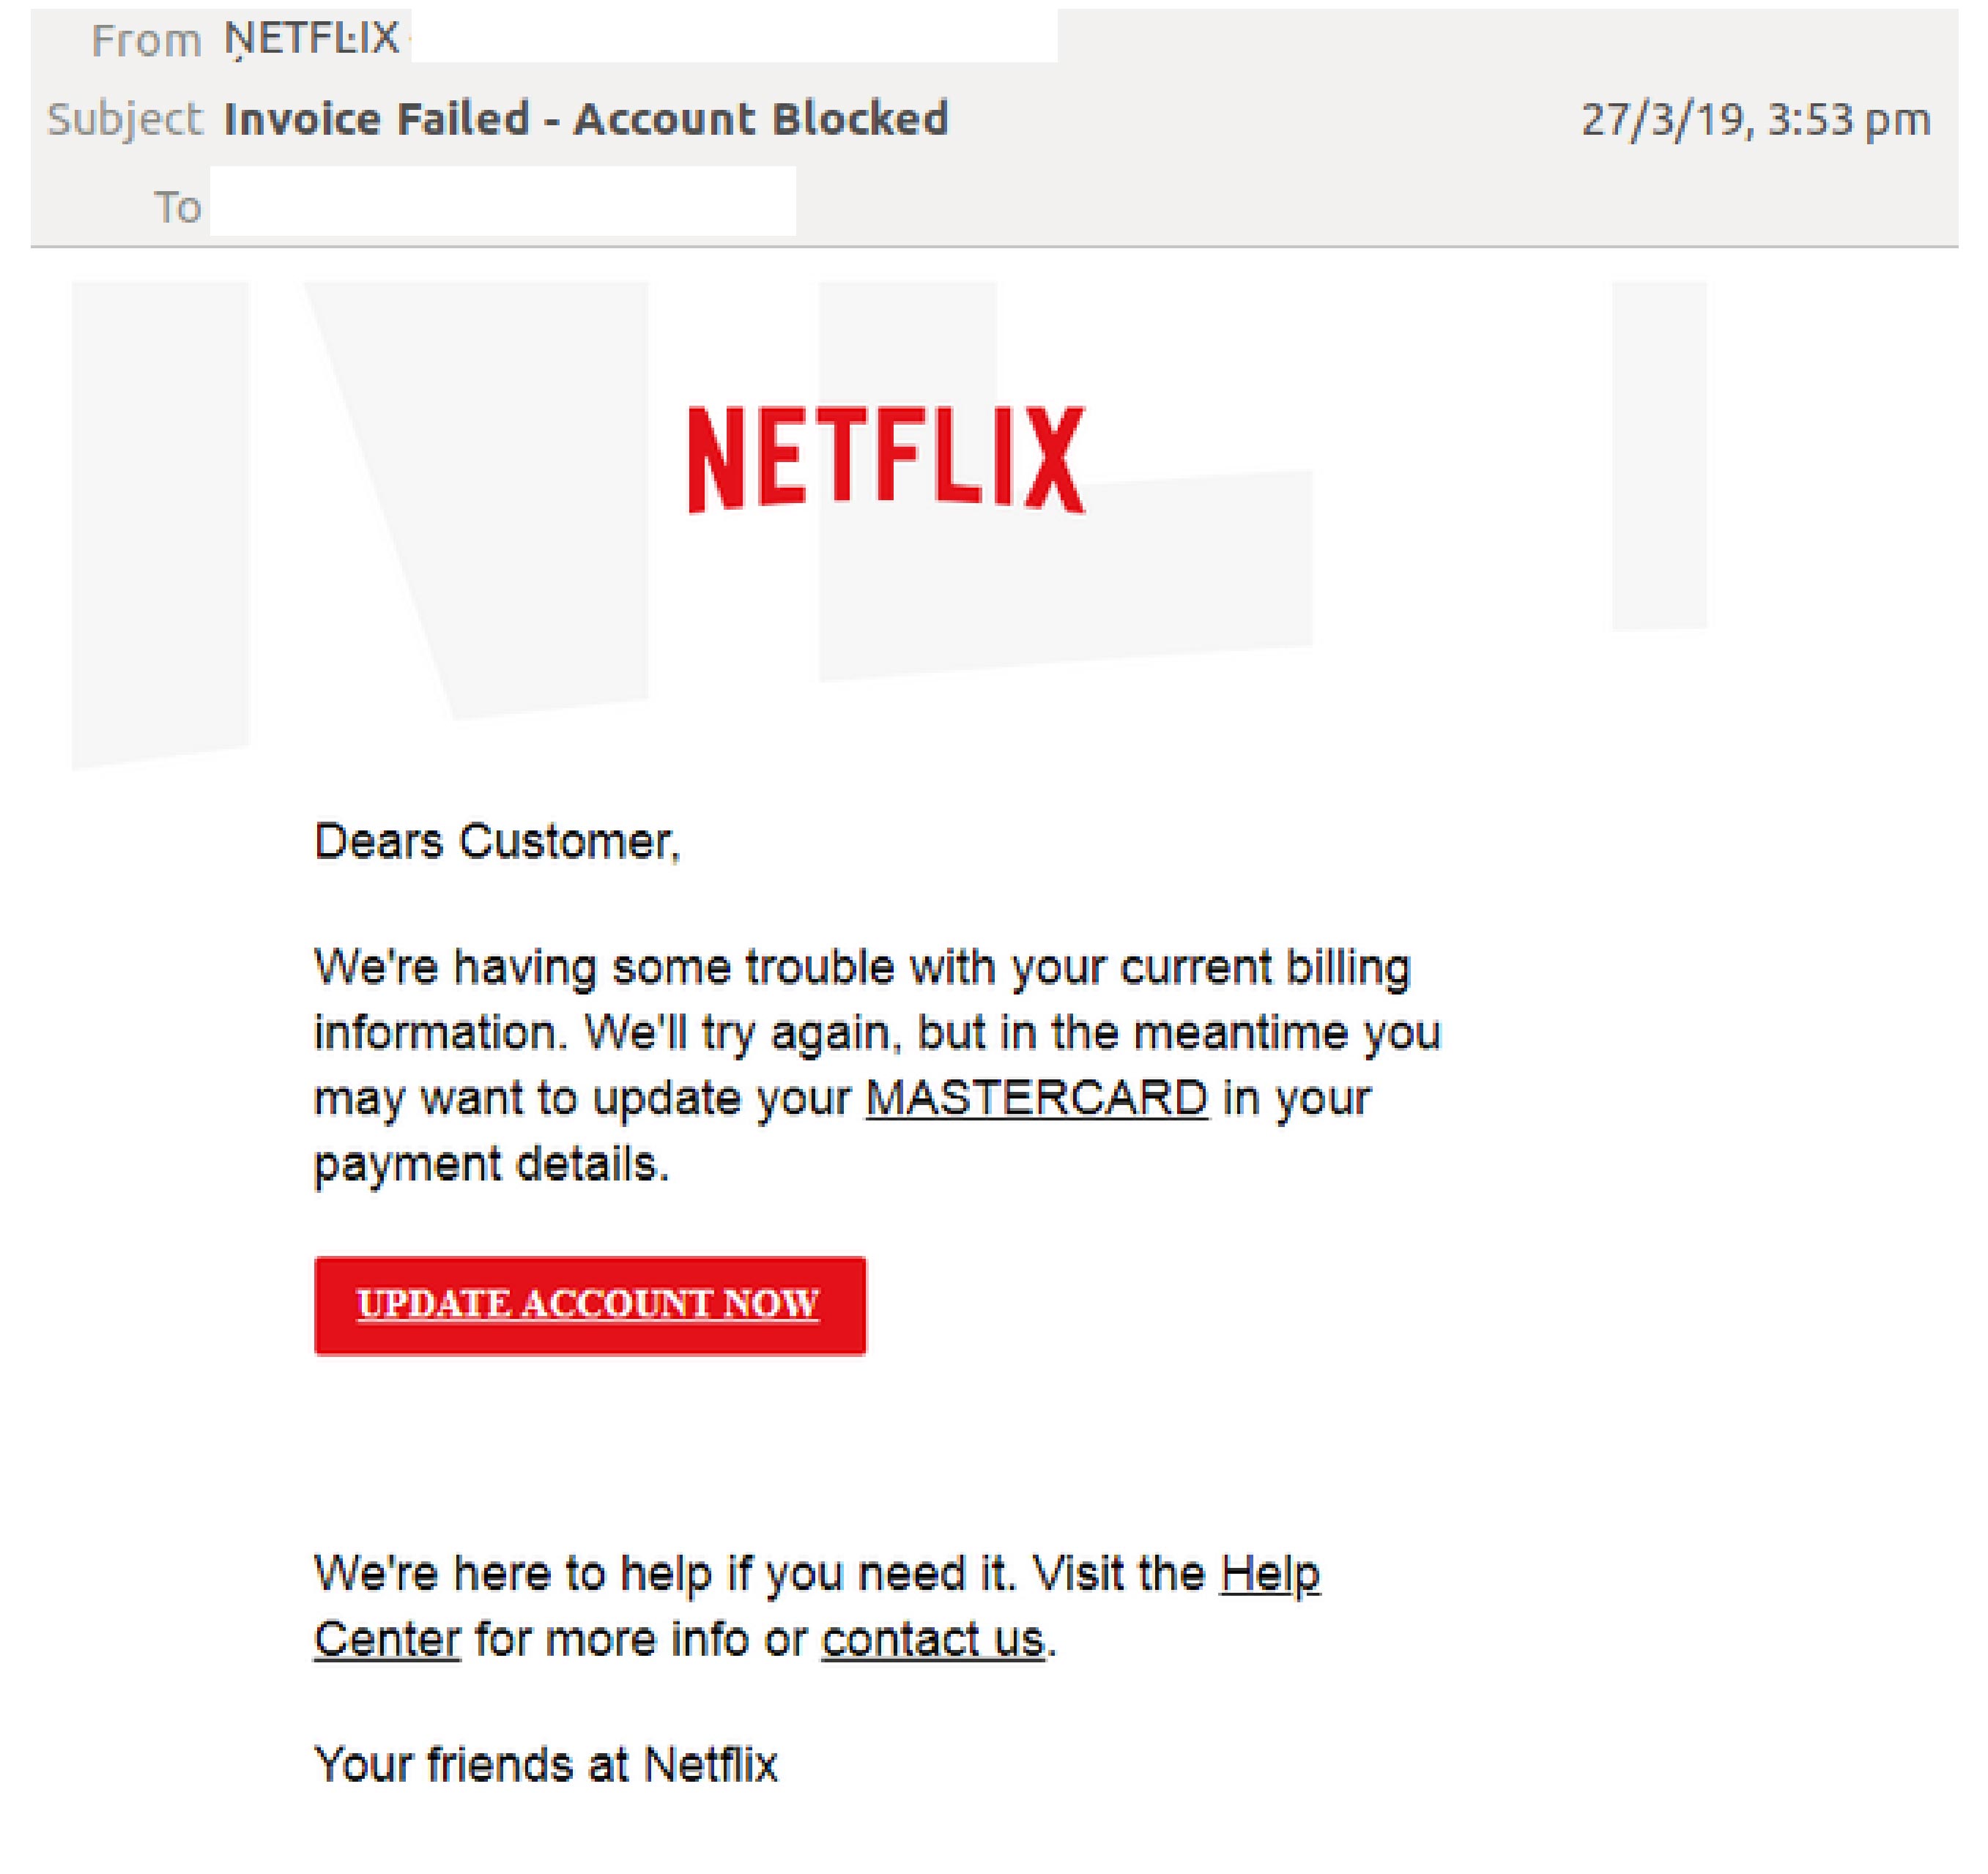 Netflix spoofed once again in phishing email scam